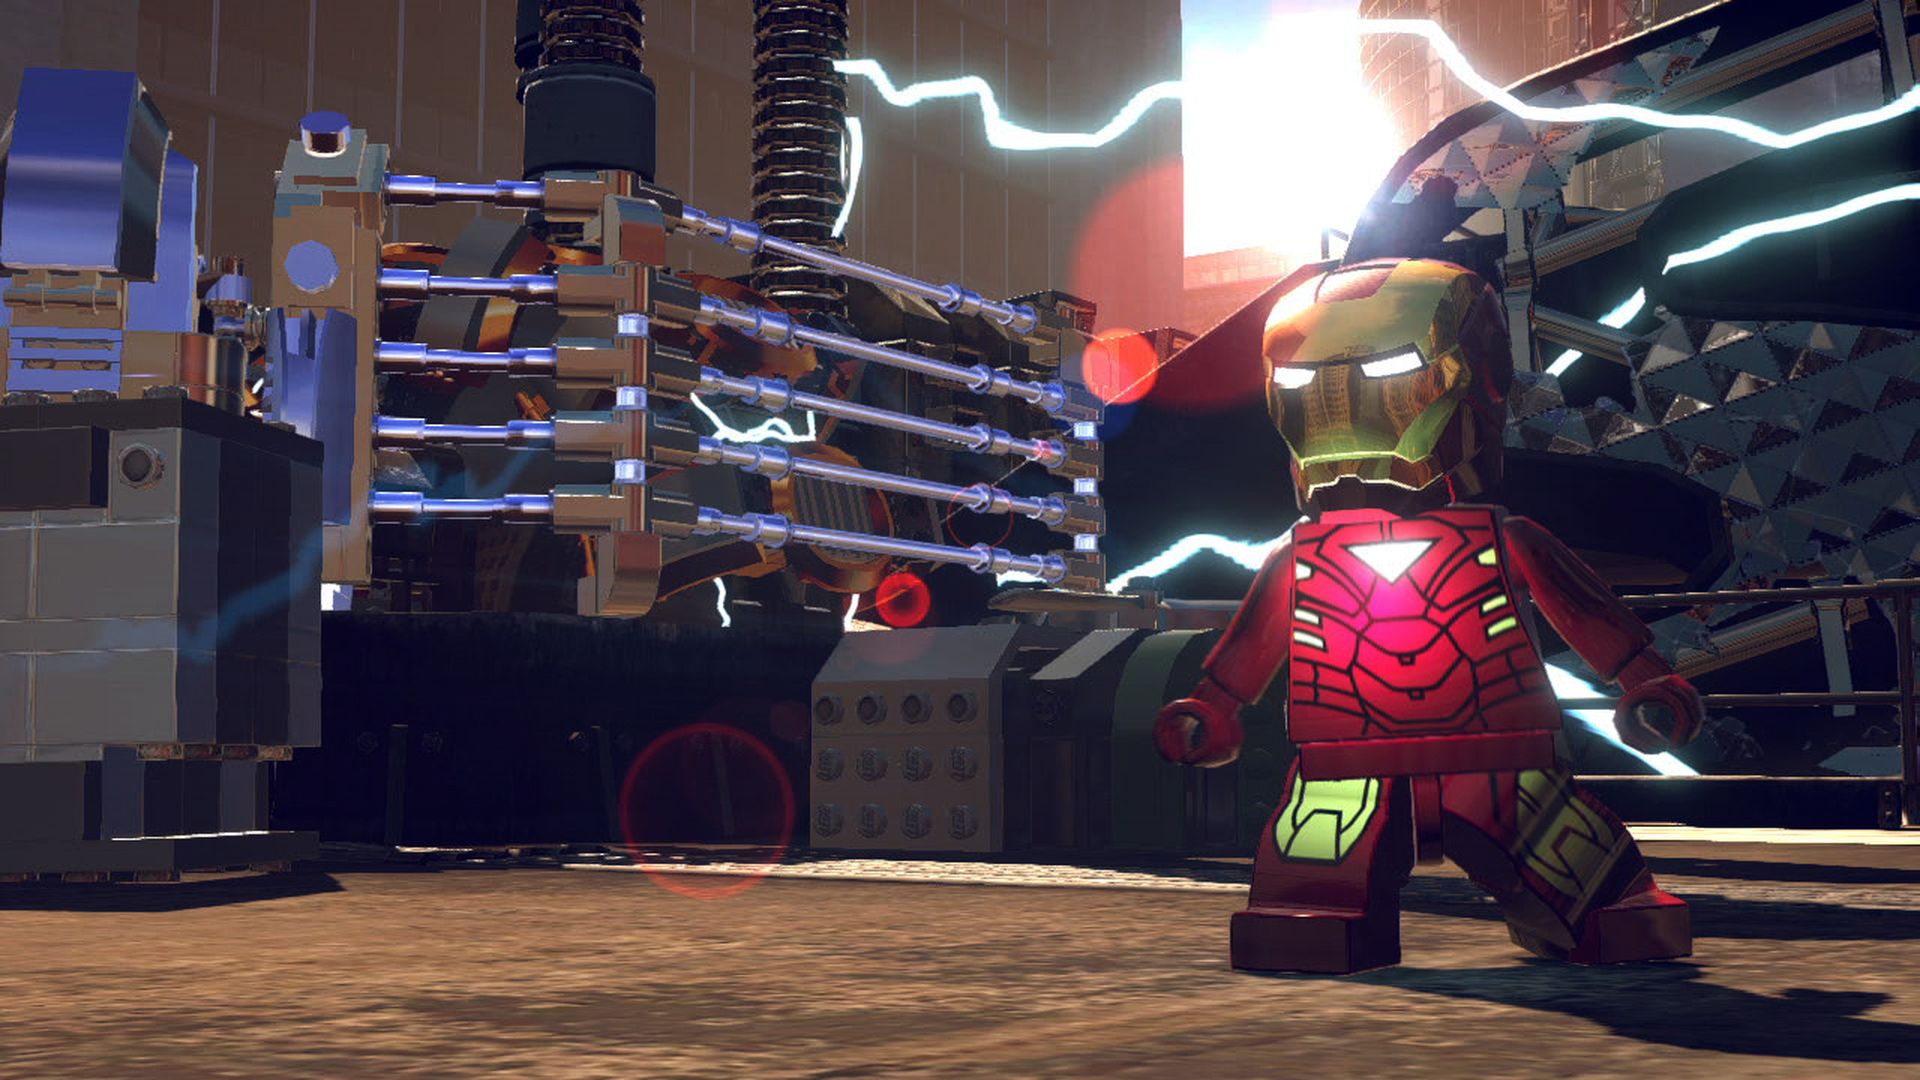 Today, we will be going over how to unlock Silver Surfer in Lego Marvel Superheroes, so you can enjoy playing this iconic character in the game.